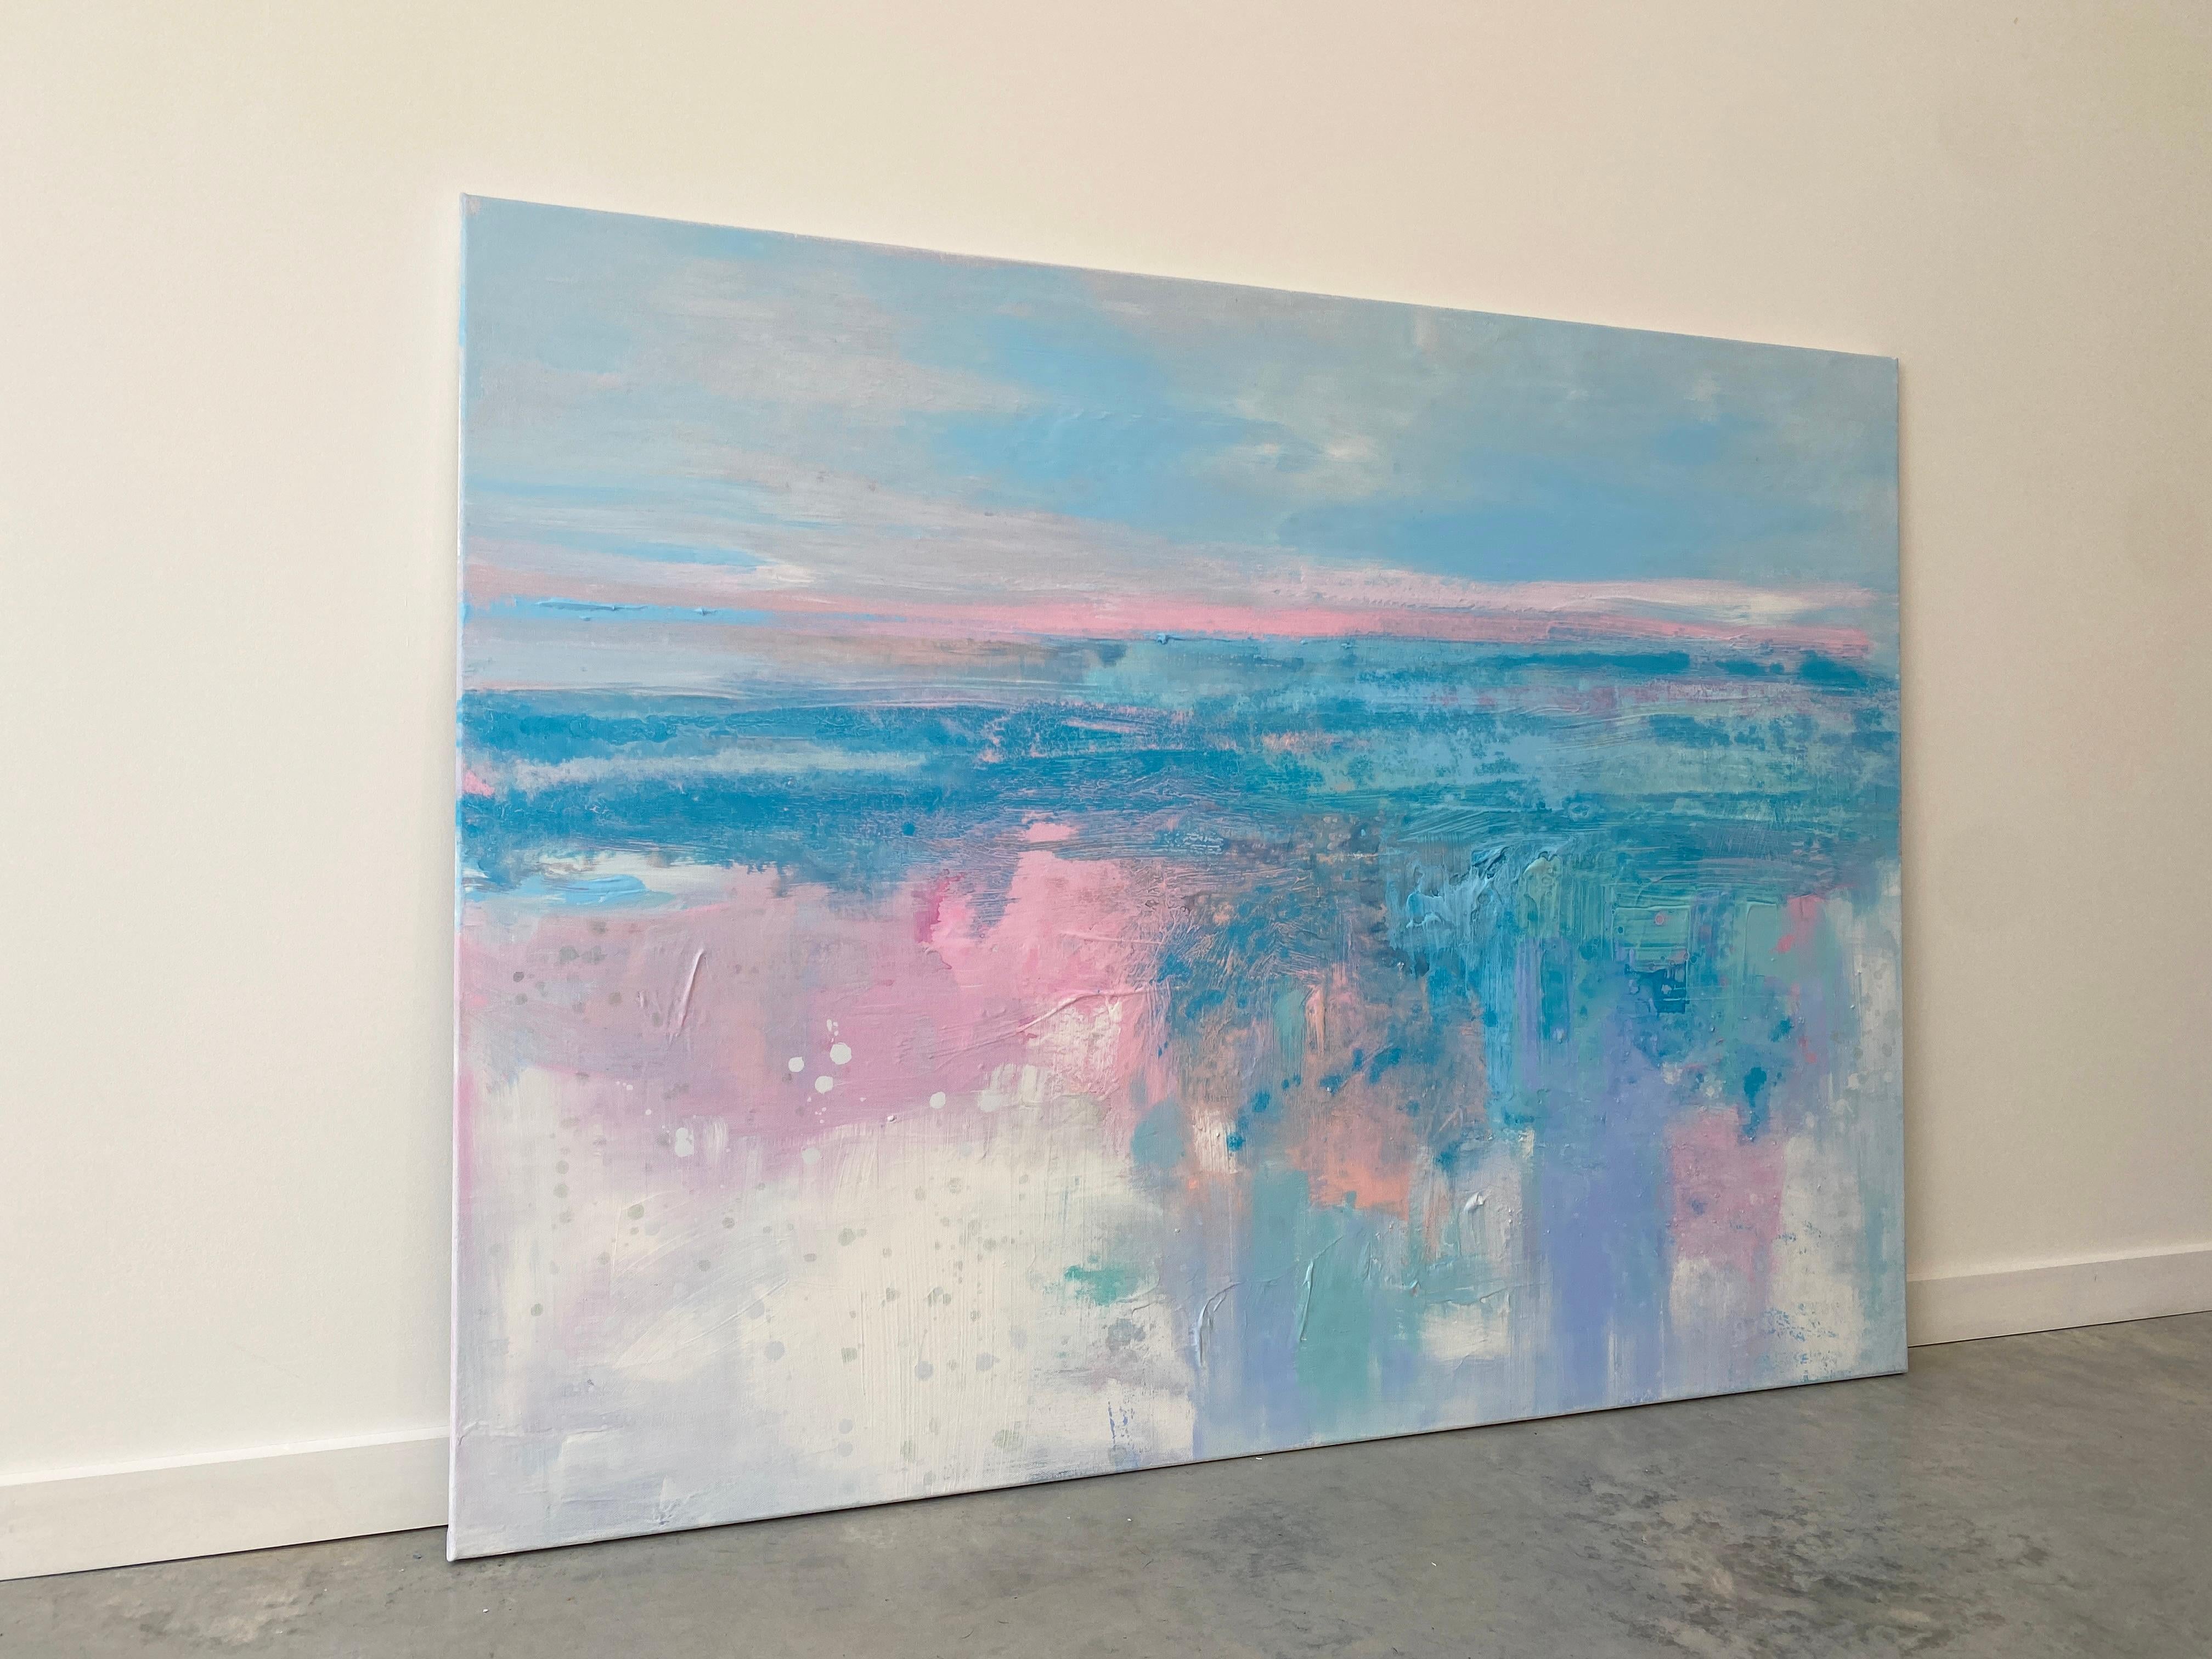 Pastel Waters an abstract landscape painting from my 'Serene Shorelines Collection'. 
Let light and peace fill you day, a meditative abstract expressionist painting. Exploring the beauty of Australian coastal shorelines with mirrored waters, sandy